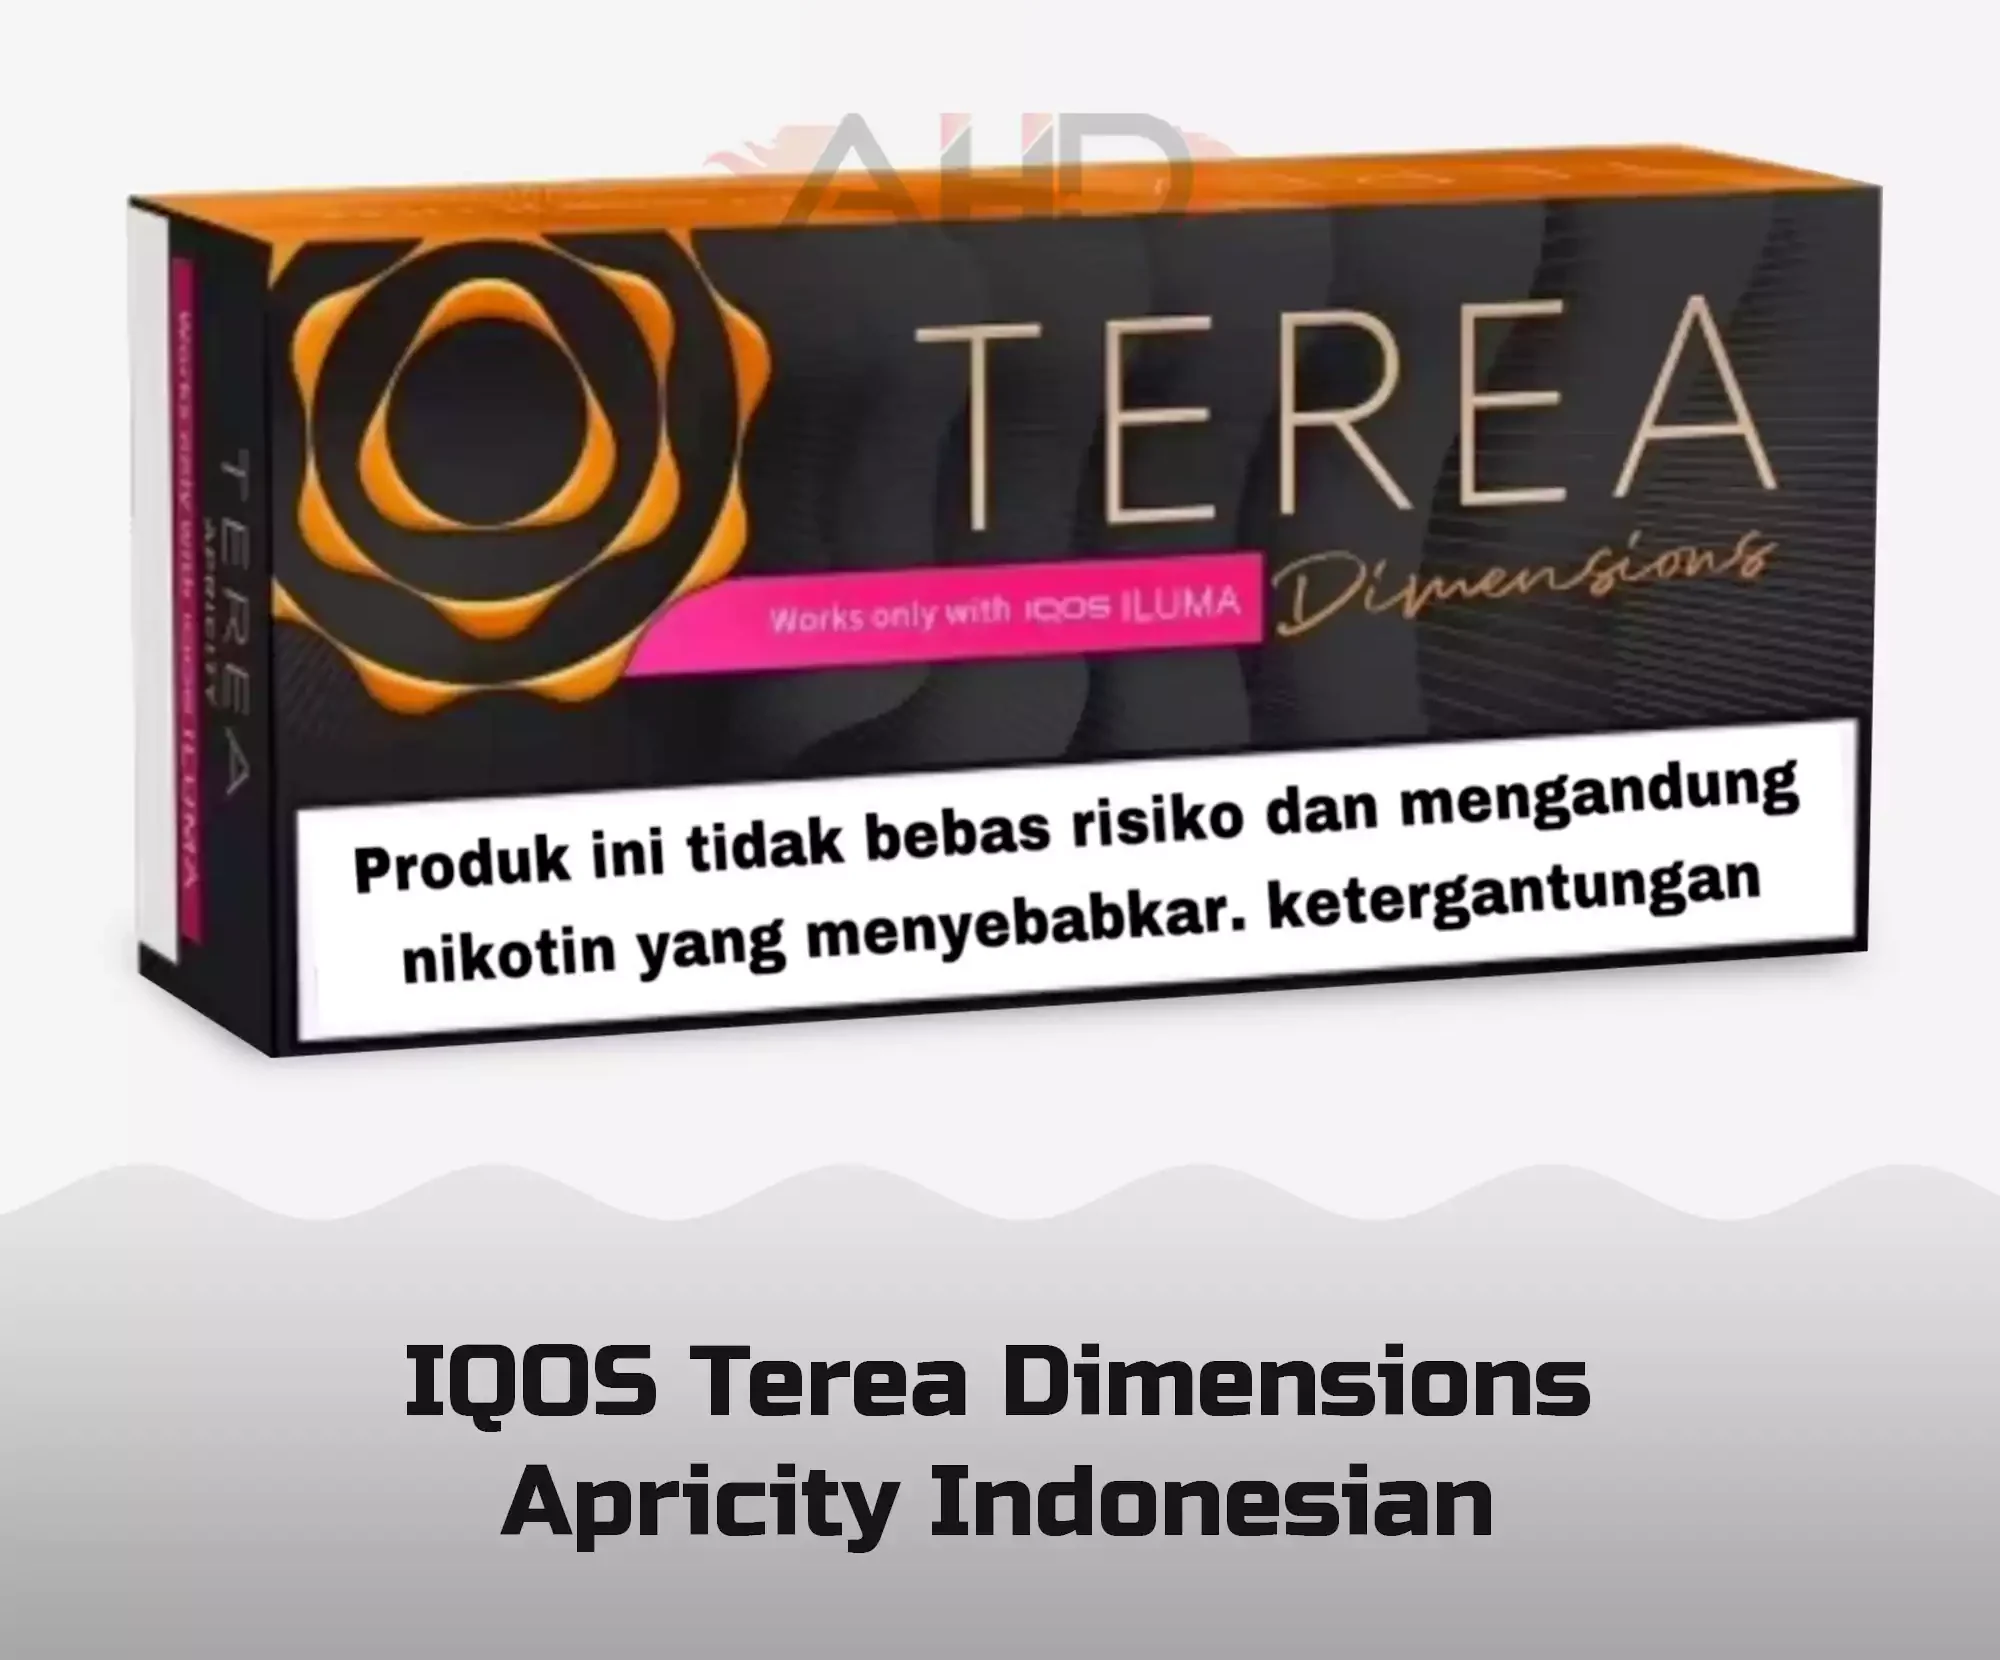 IQOS TEREA DIMENSIONS APRICITY INDONESIAN in Oman